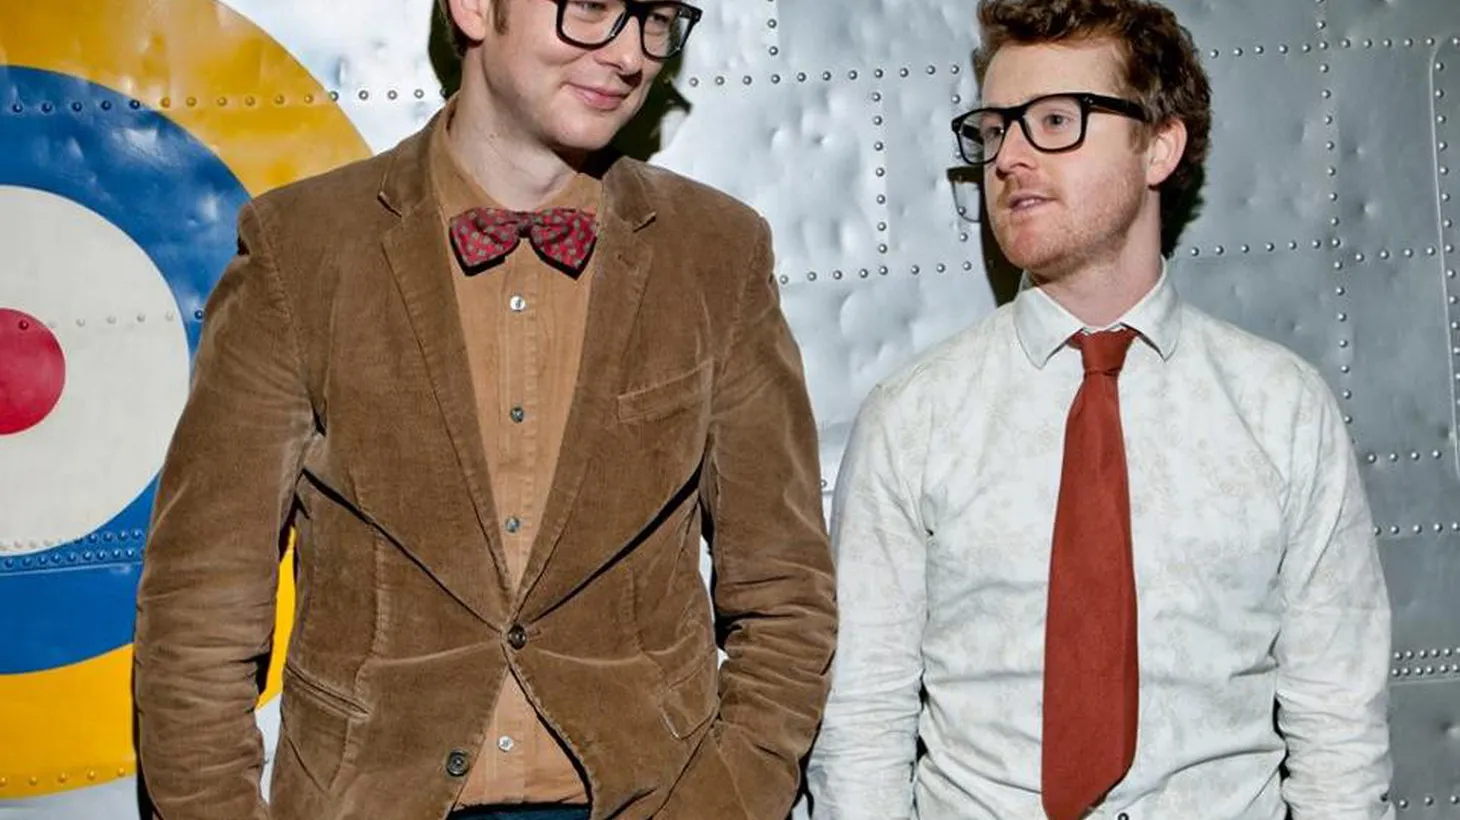 South London duo Public Service Broadcasting released a compelling album last year, a fast-paced pastiche of audio samples culled from public information films and newsreels.